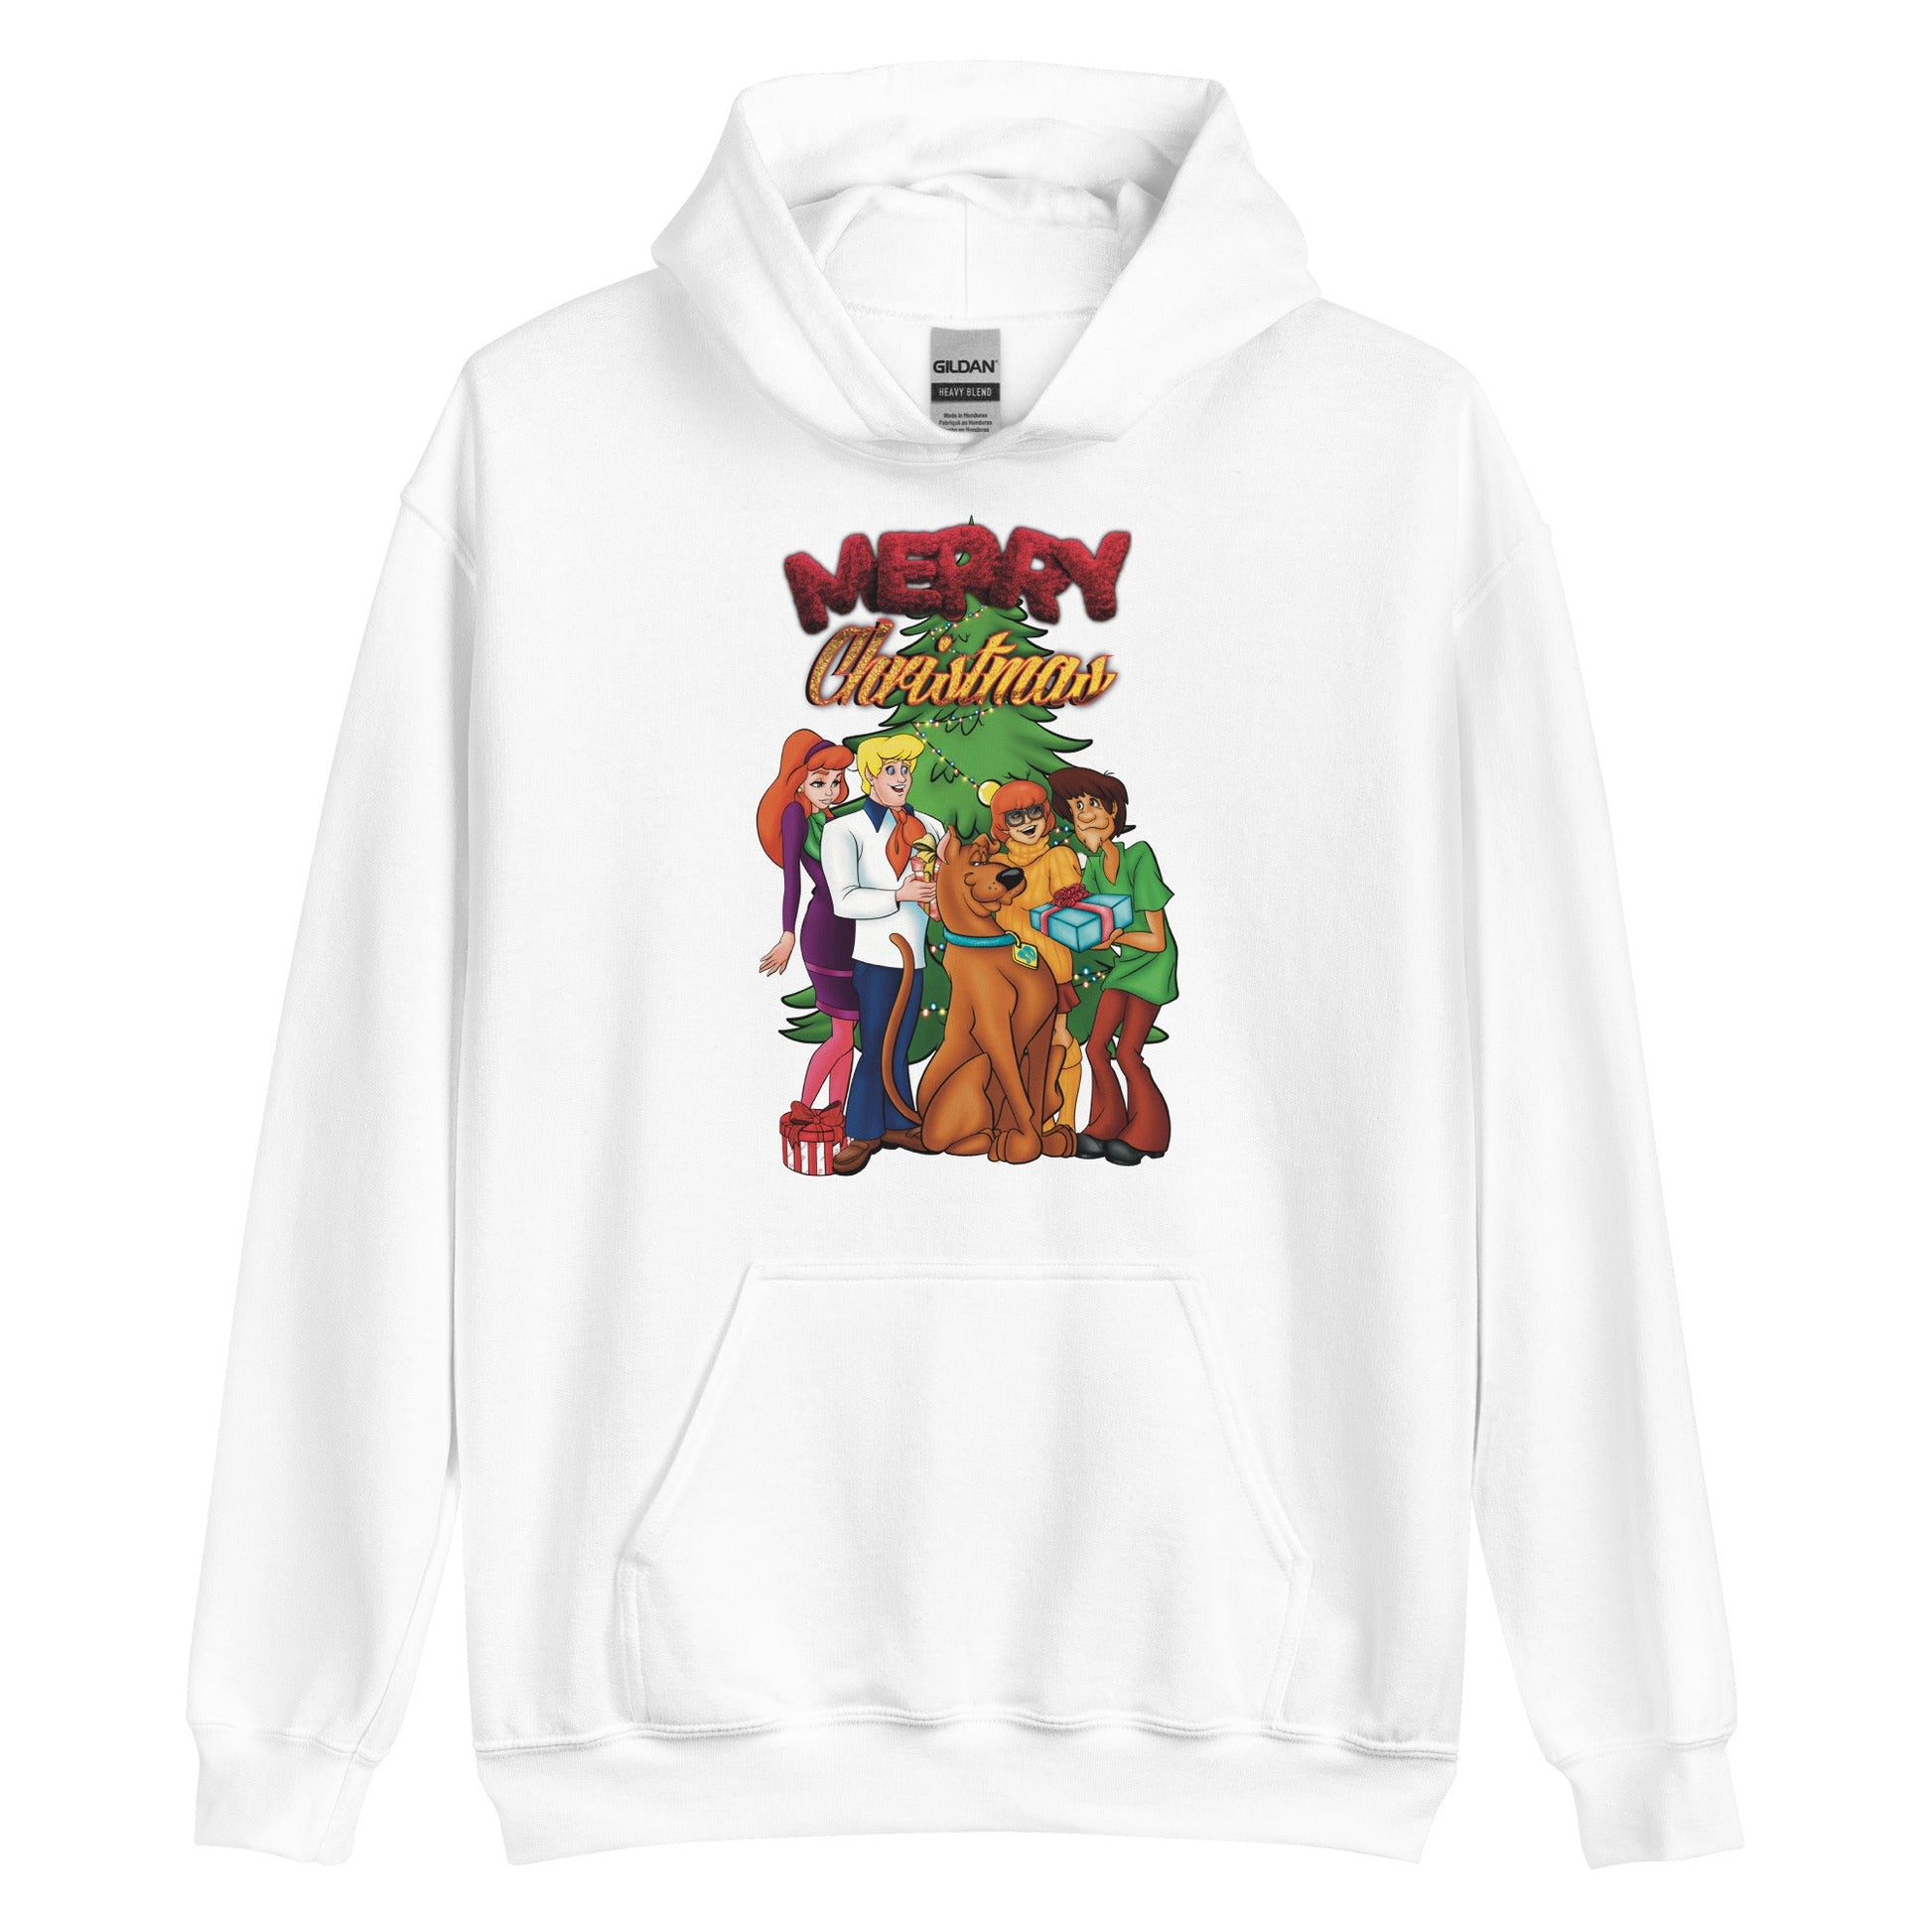 Scooby Doo and Friends Merry Christmas Unisex Hoodie - smuniqueshirts